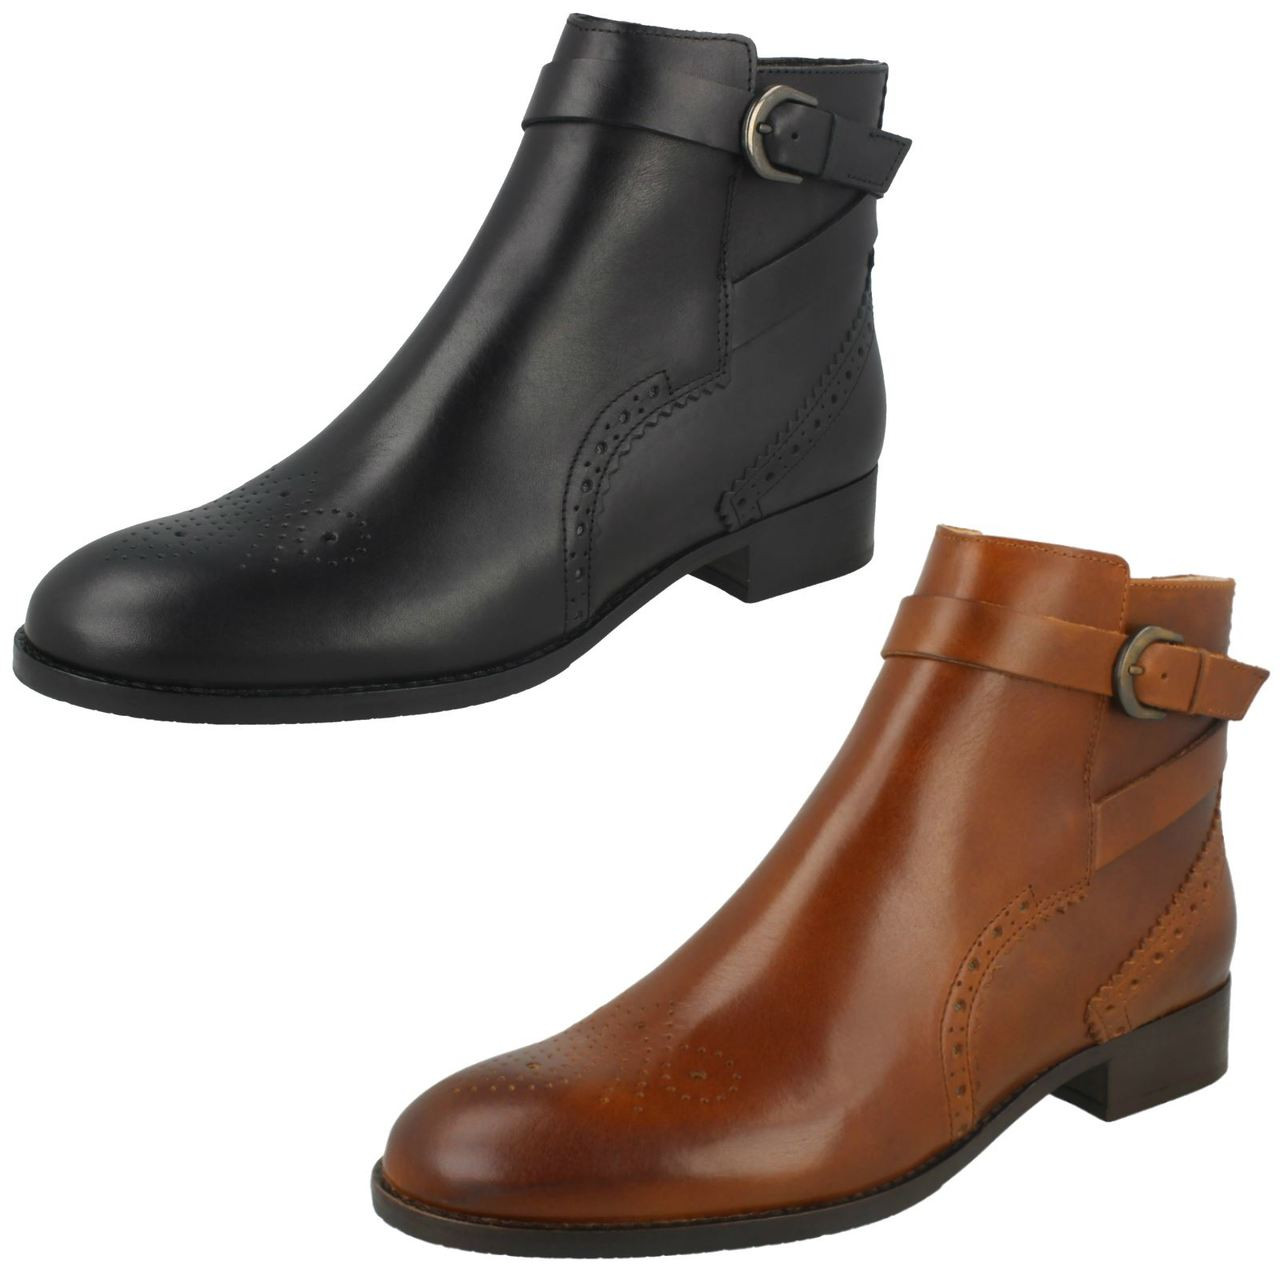 Ladies Clarks Smart Ankle Boots